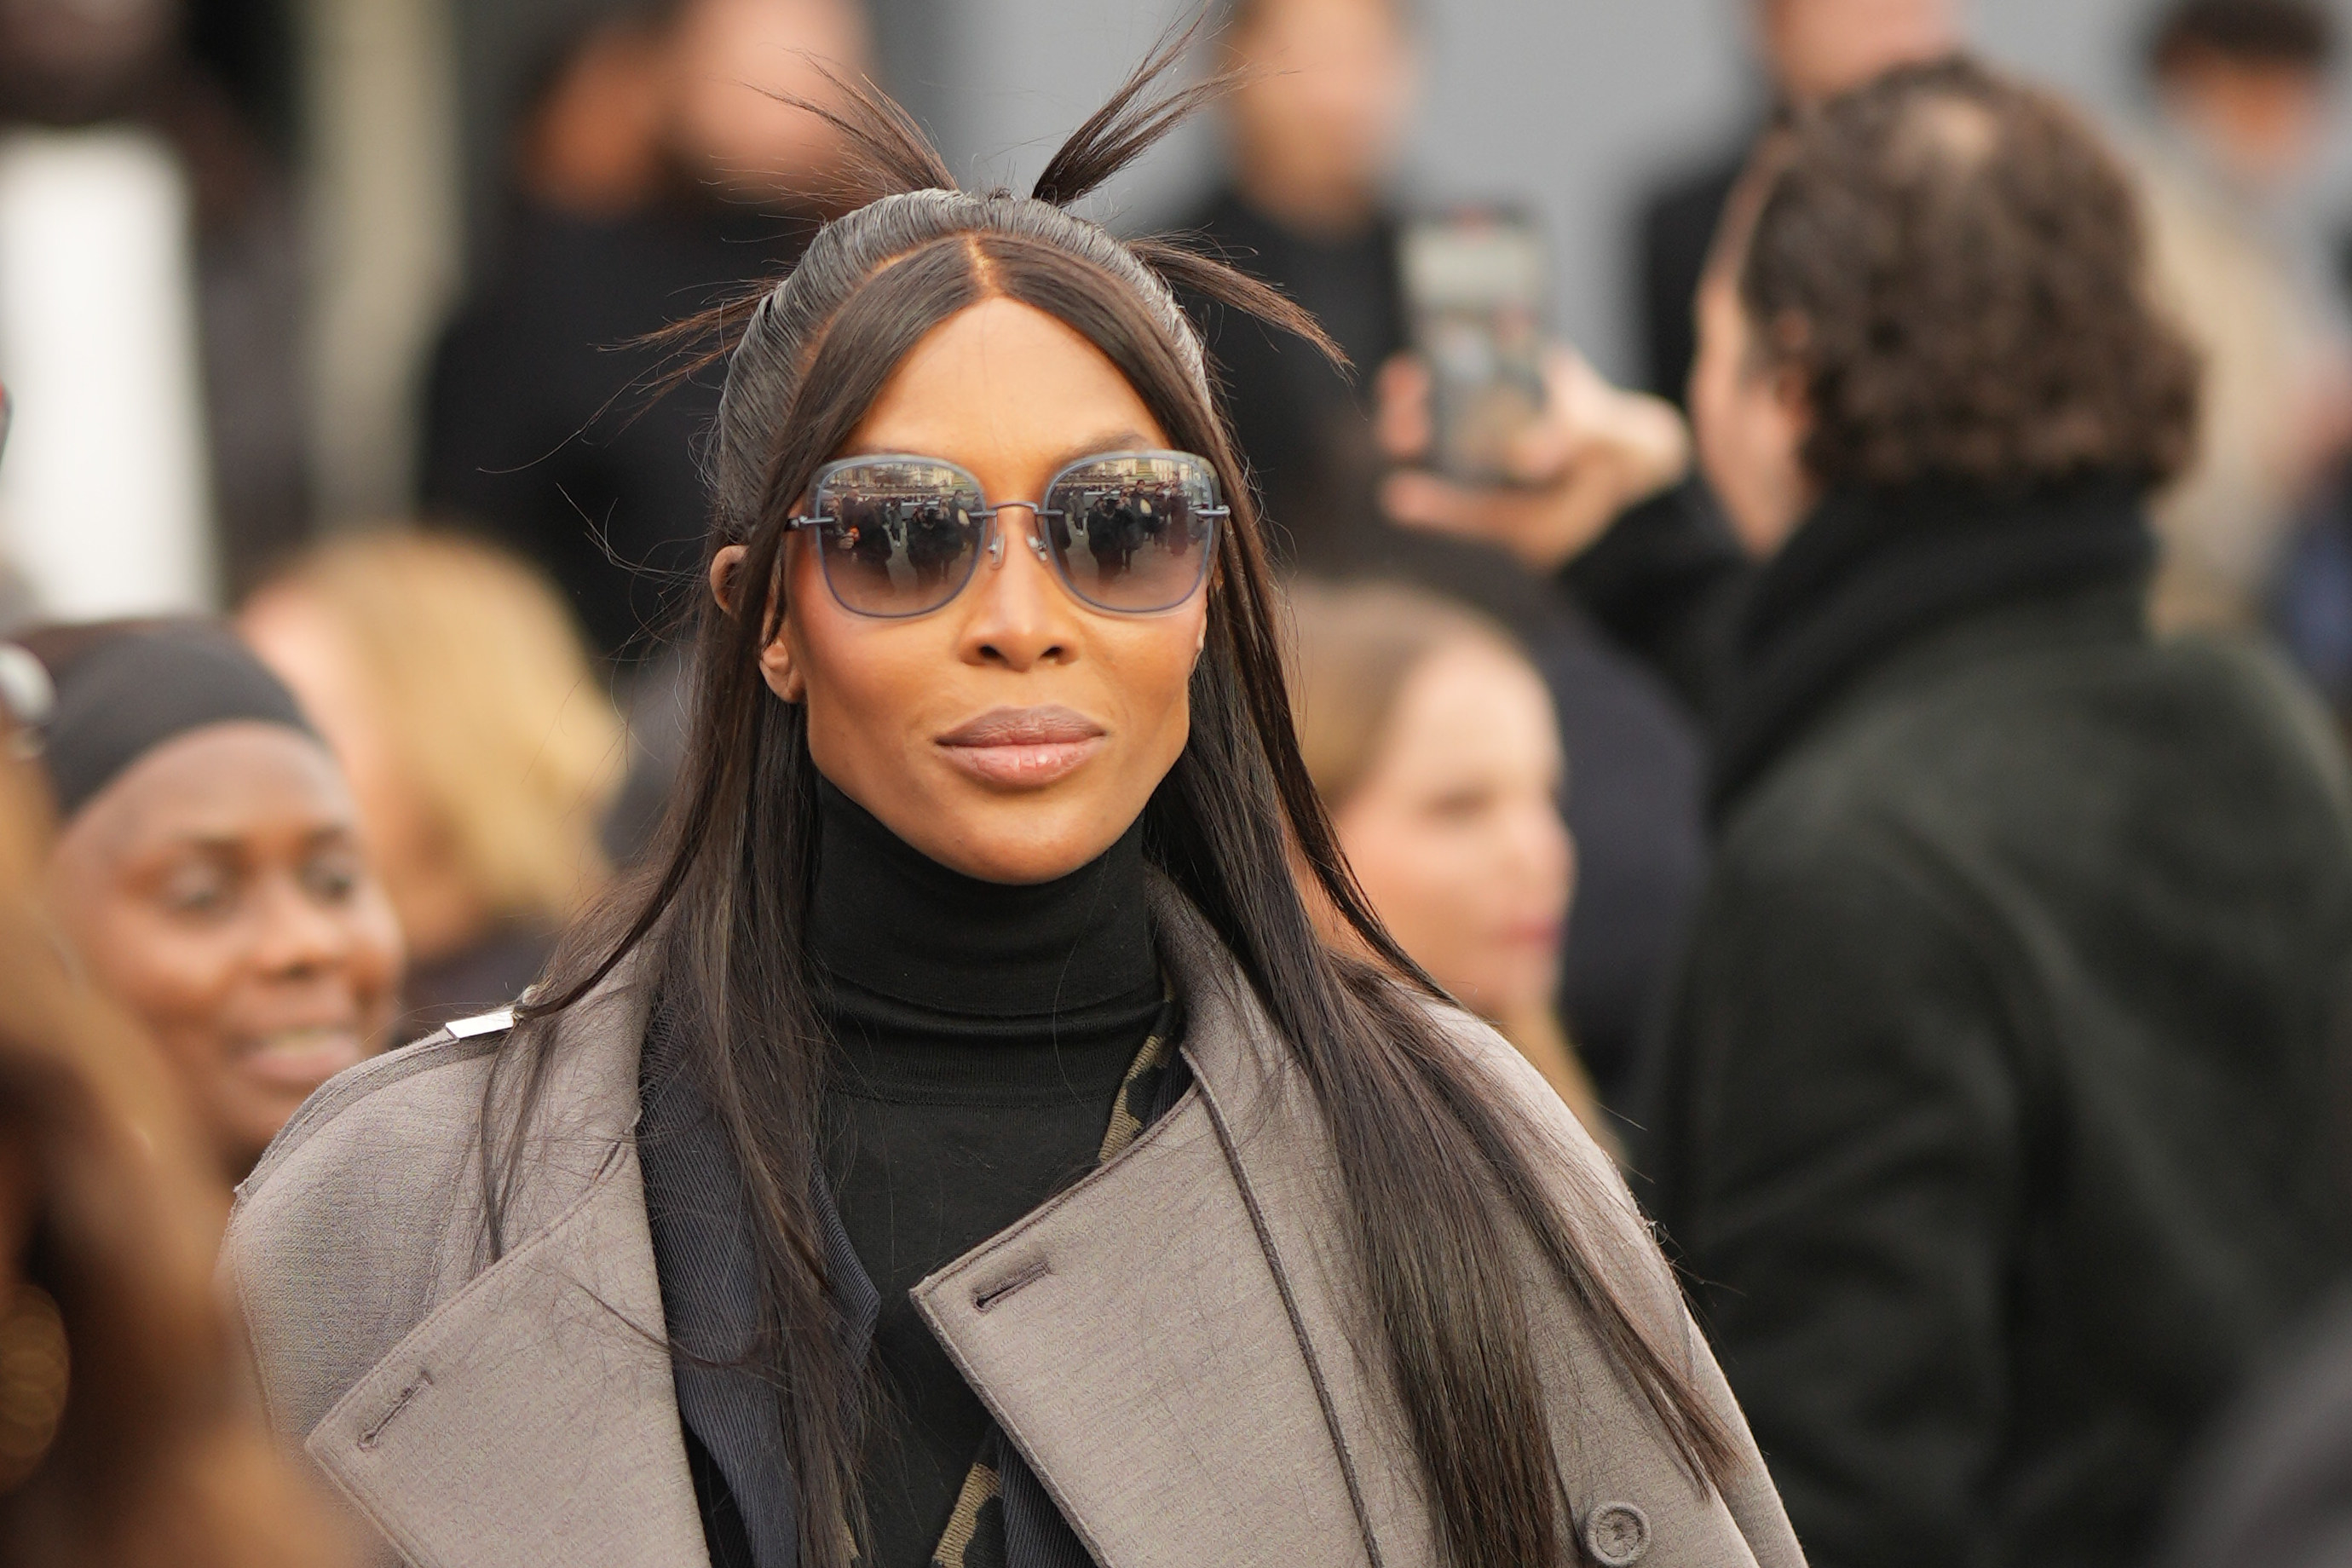 naomi campbell in a black turtleneck, gray coat, and sunglasses